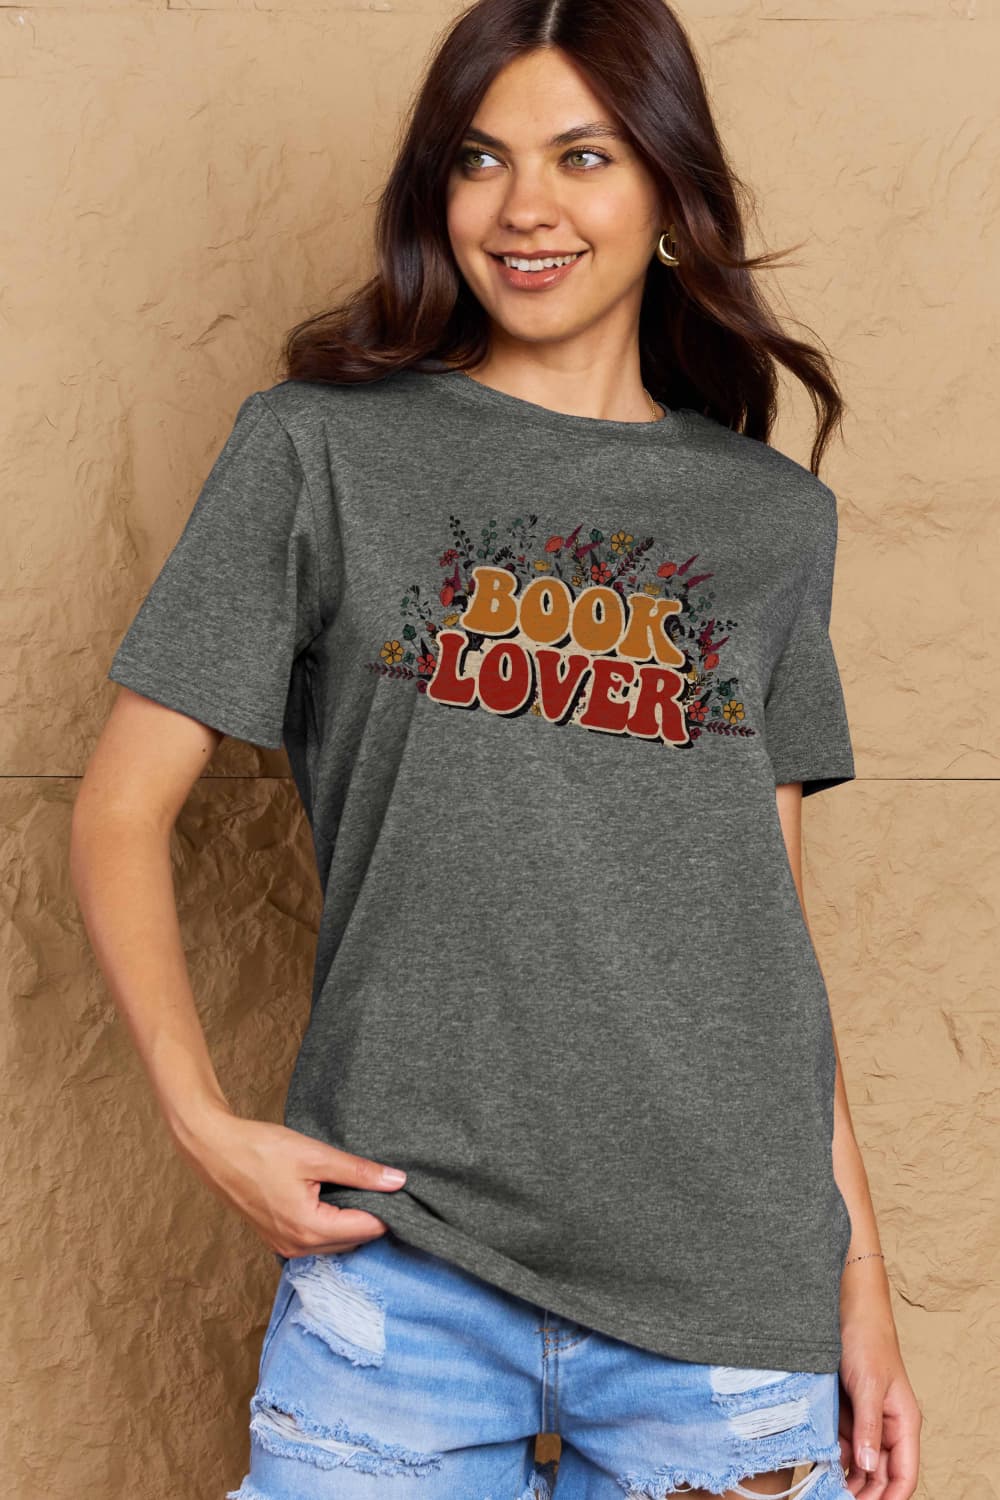 Simply Love Full Size BOOK LOVER Graphic Cotton Tee